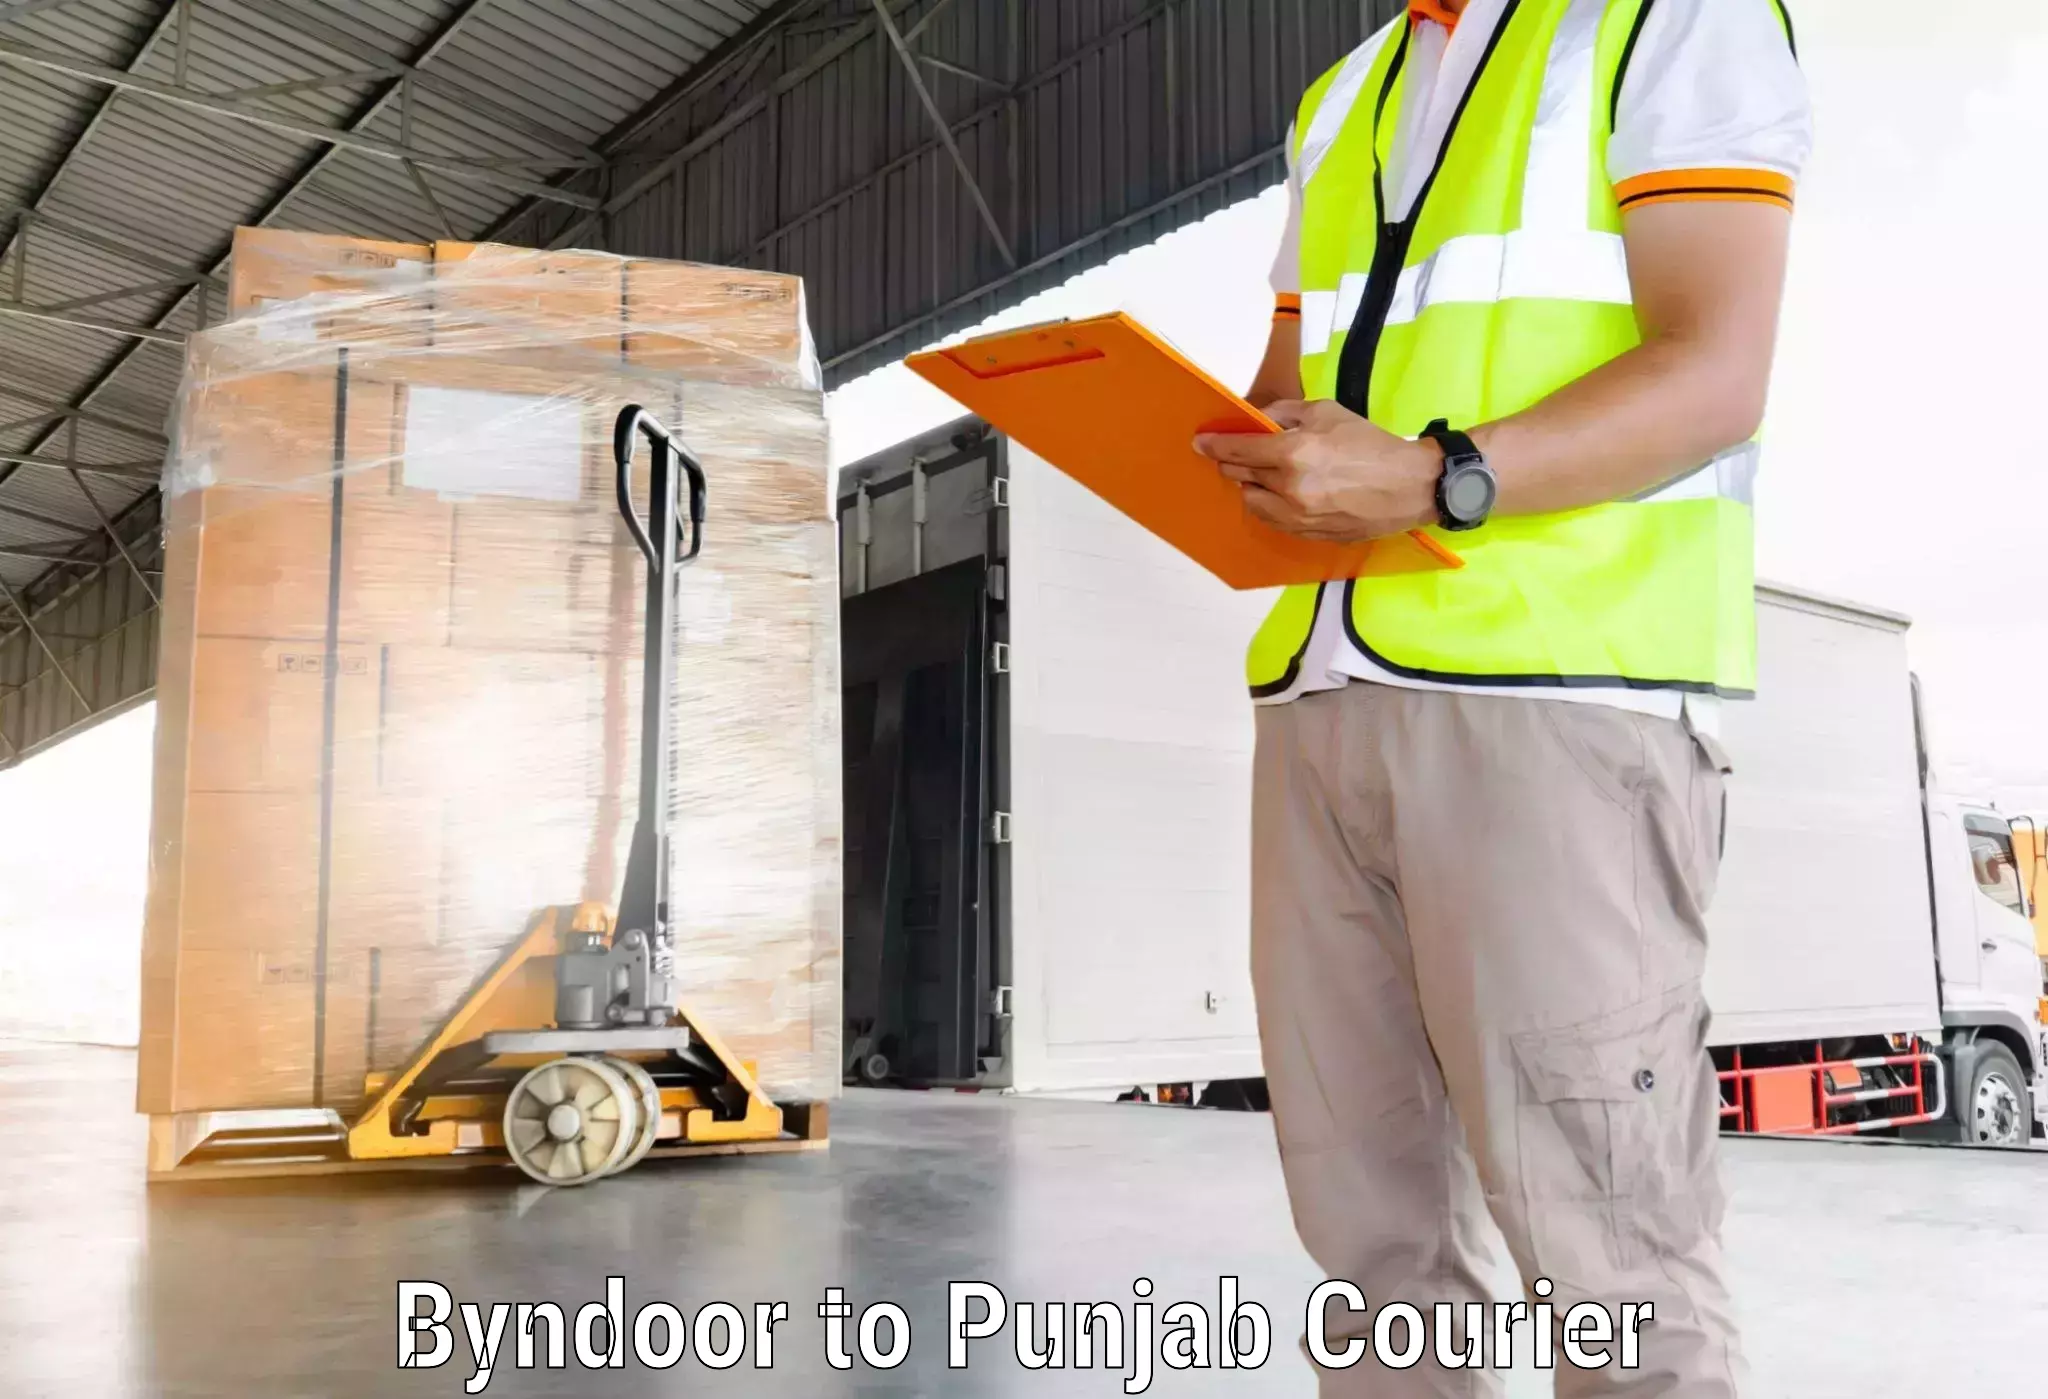 Courier service innovation Byndoor to Khanna